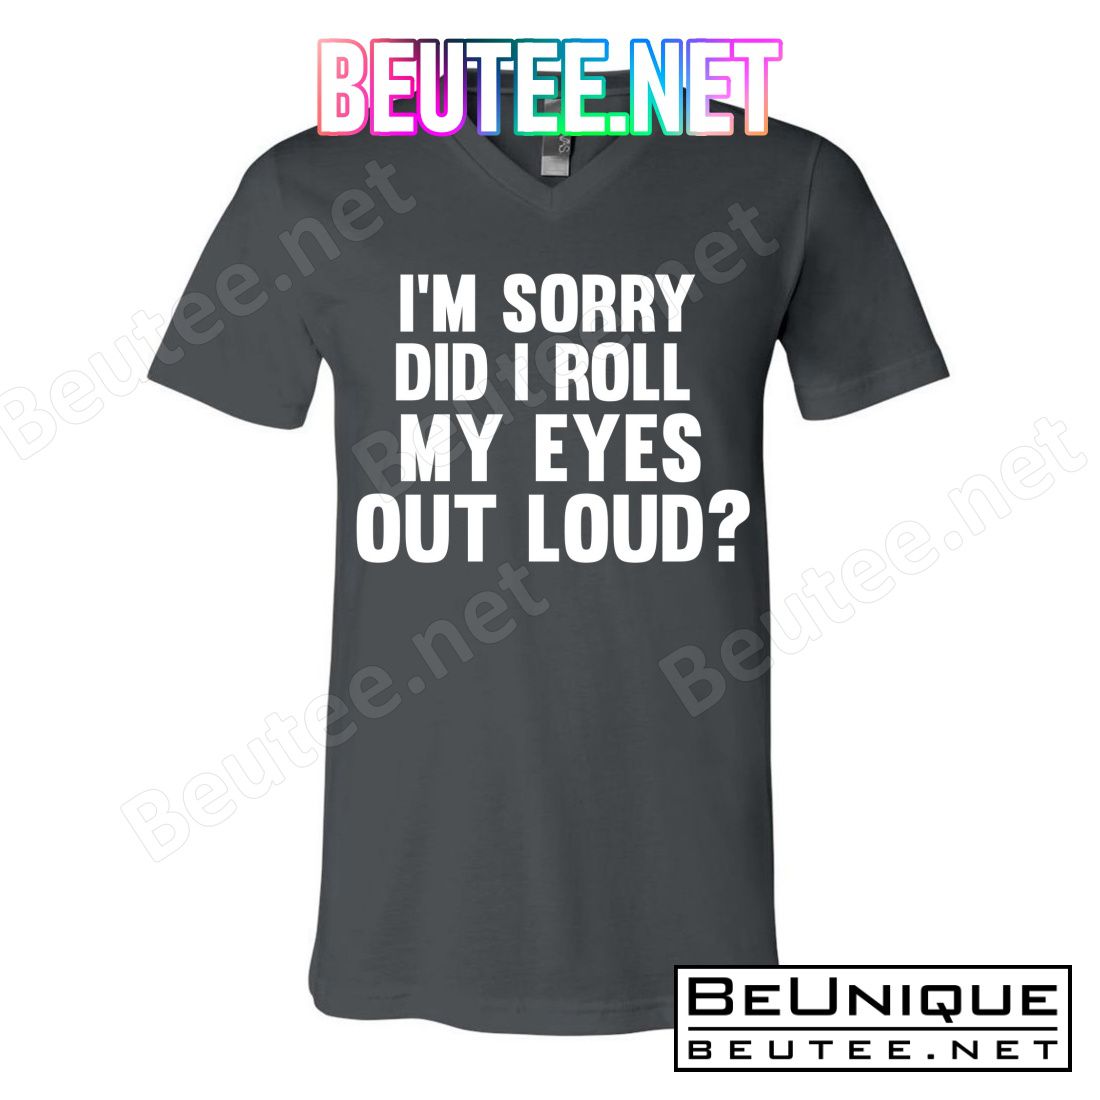 I'm Sorry Did I Roll My Eyes Out Loud? T-Shirts